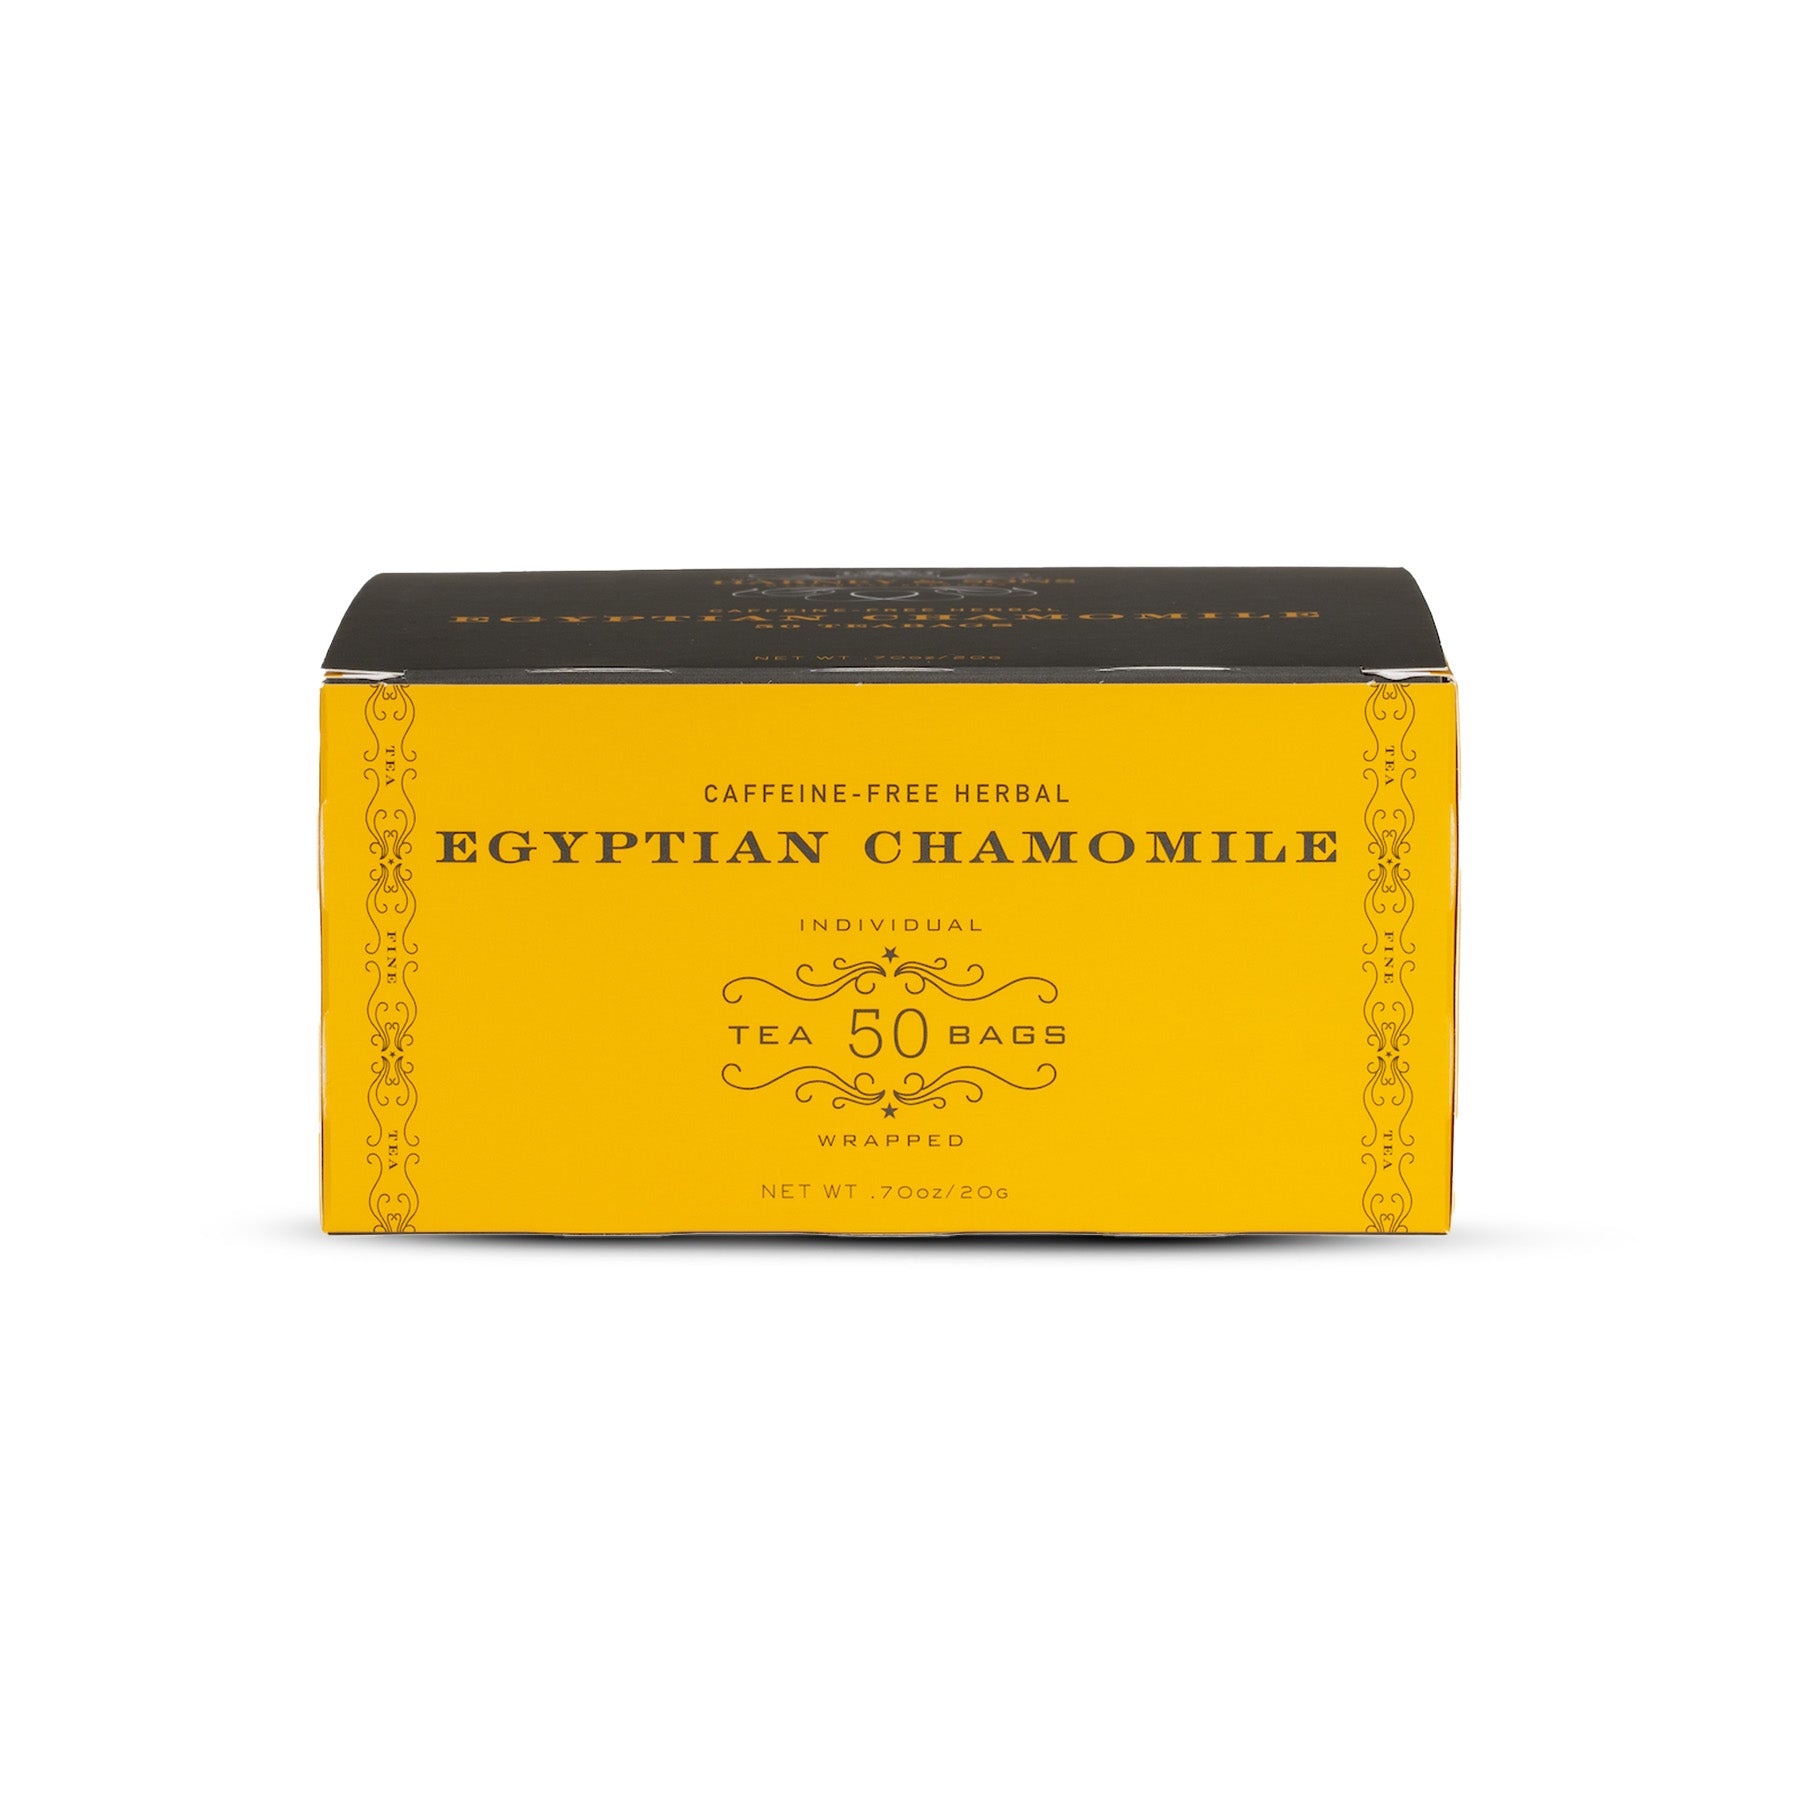 Egyptian Chamomile - Teabags 50 CT Foil Wrapped Teabags - Harney & Sons Fine Teas Europe